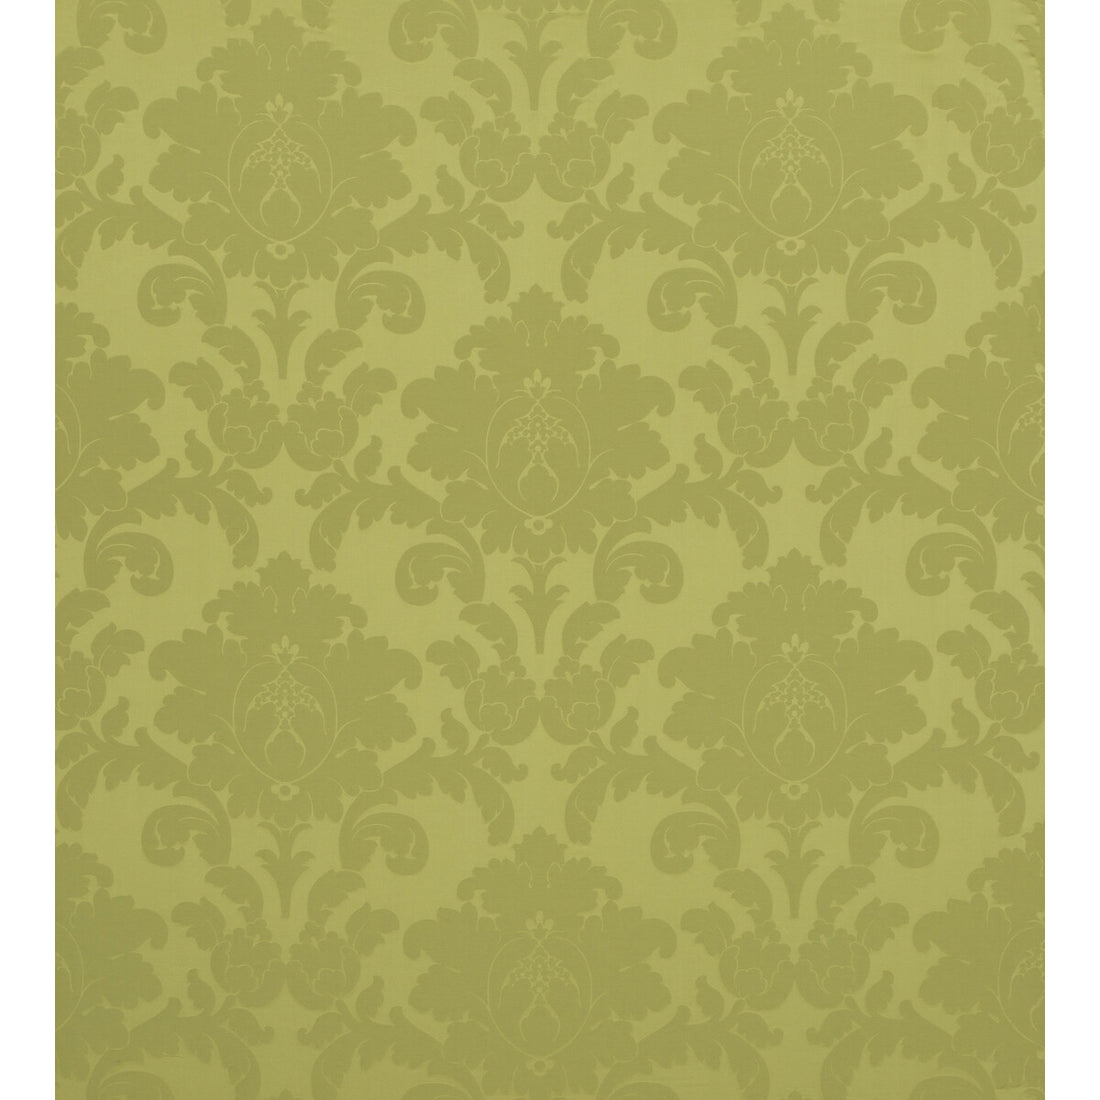 Sylvana fabric in peridot color - pattern 8014117.3.0 - by Brunschwig &amp; Fils in the Maisonnette collection